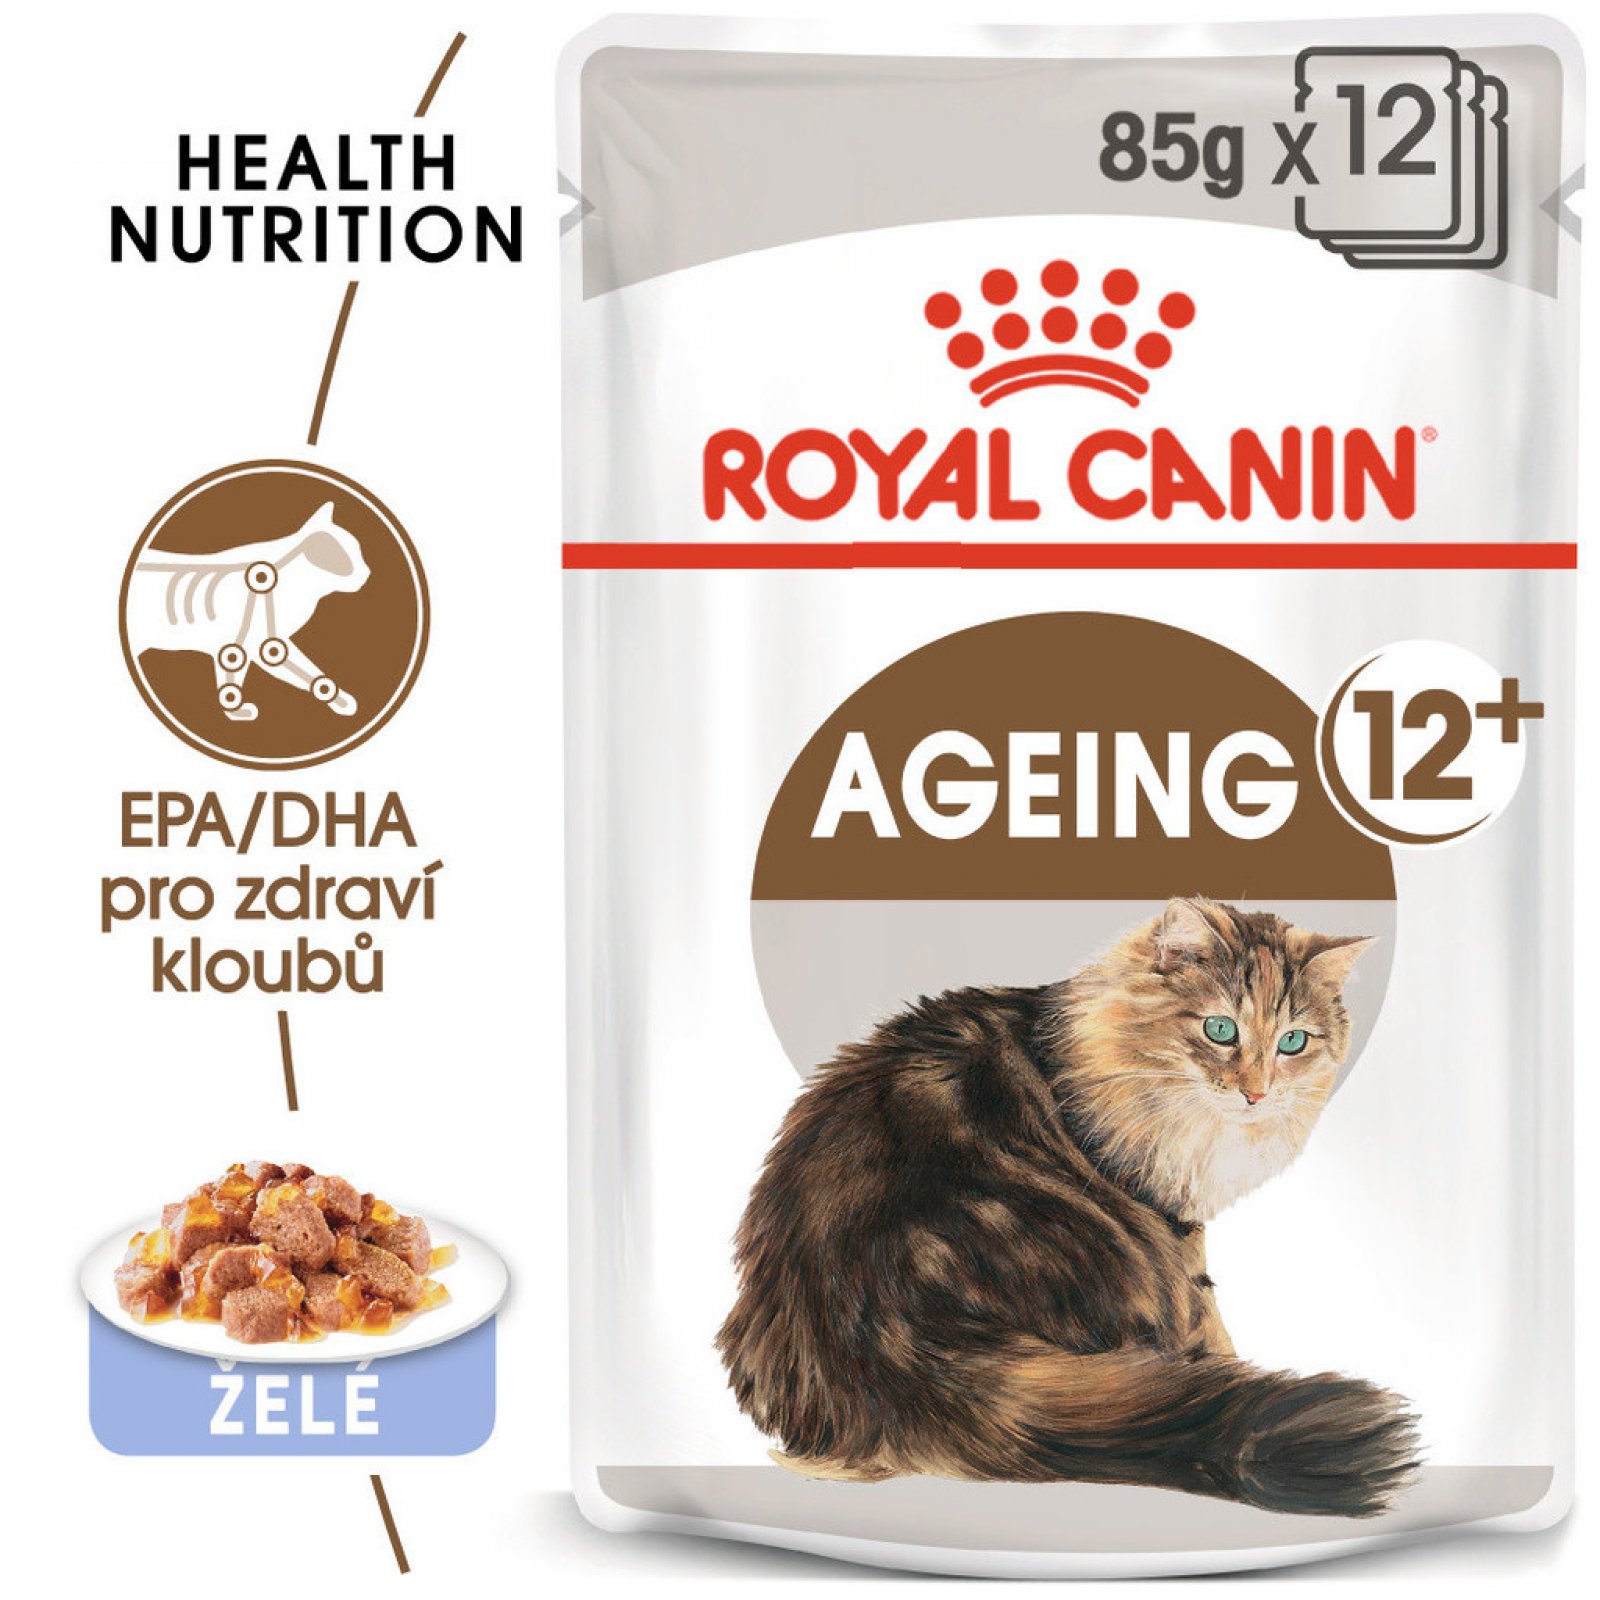 Royal Canin Aging 12+ Jelly 12 x 85g